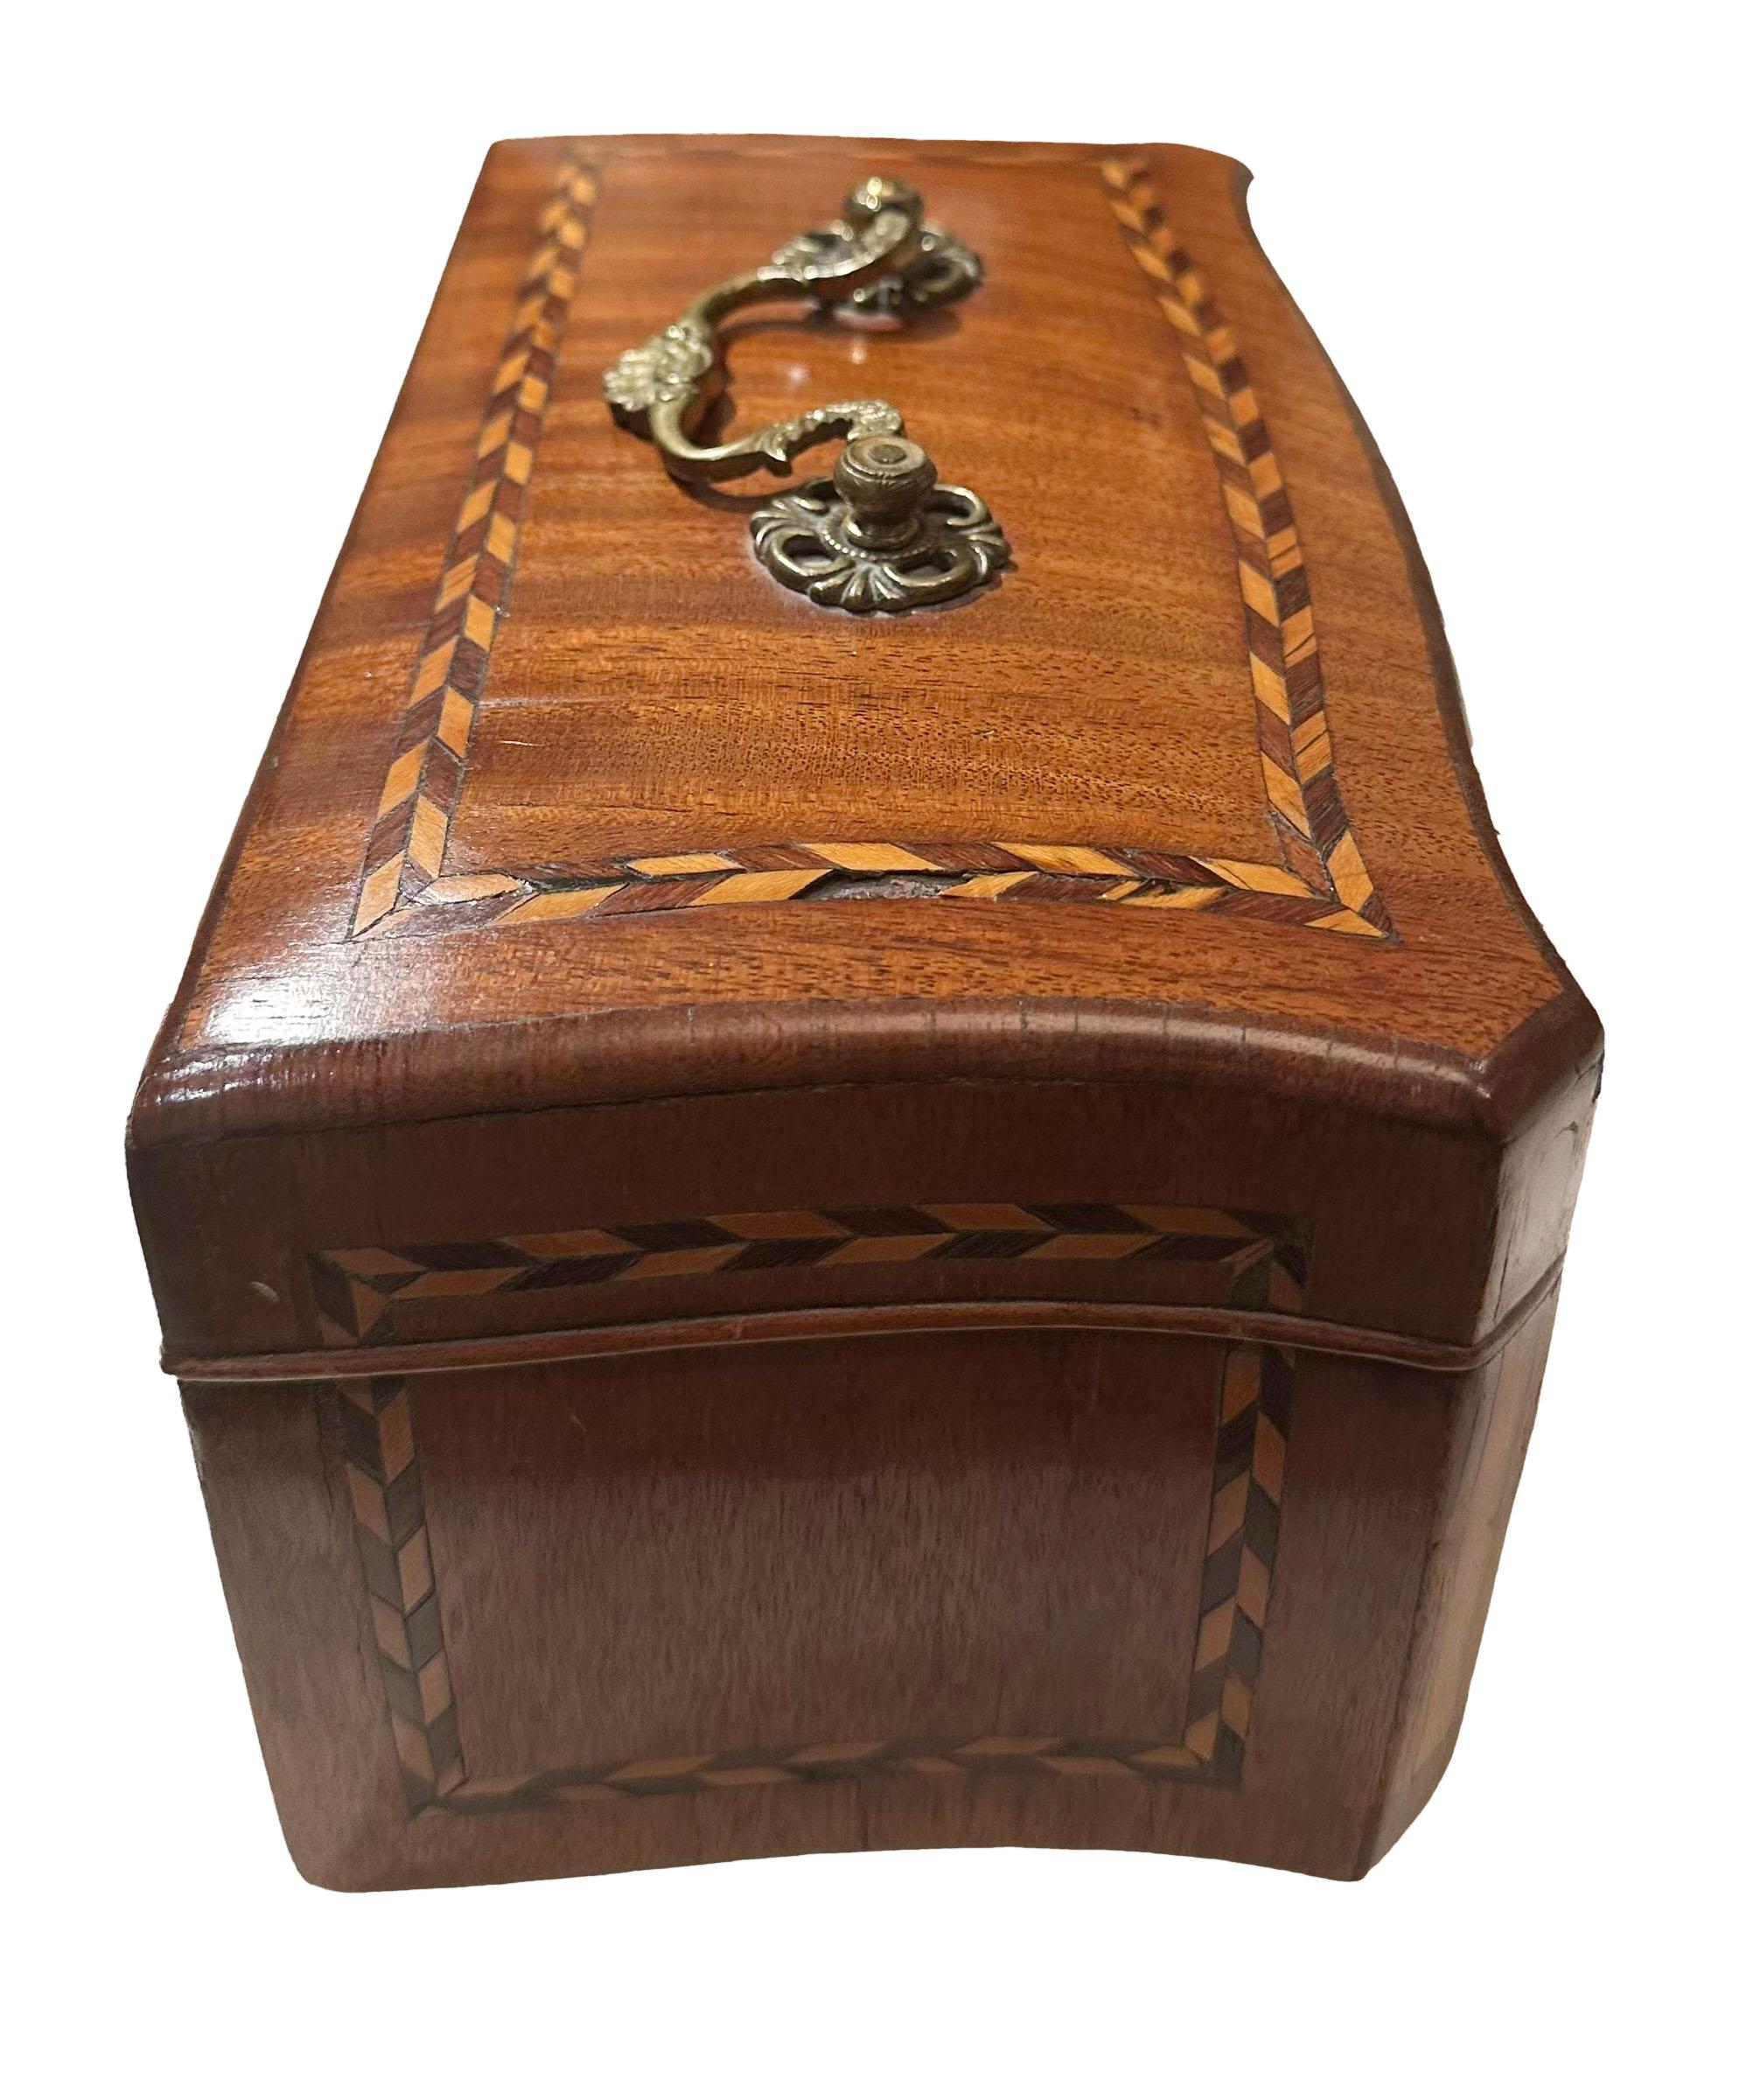 19th Century Regency Trinket Box In Good Condition For Sale In Tampa, FL